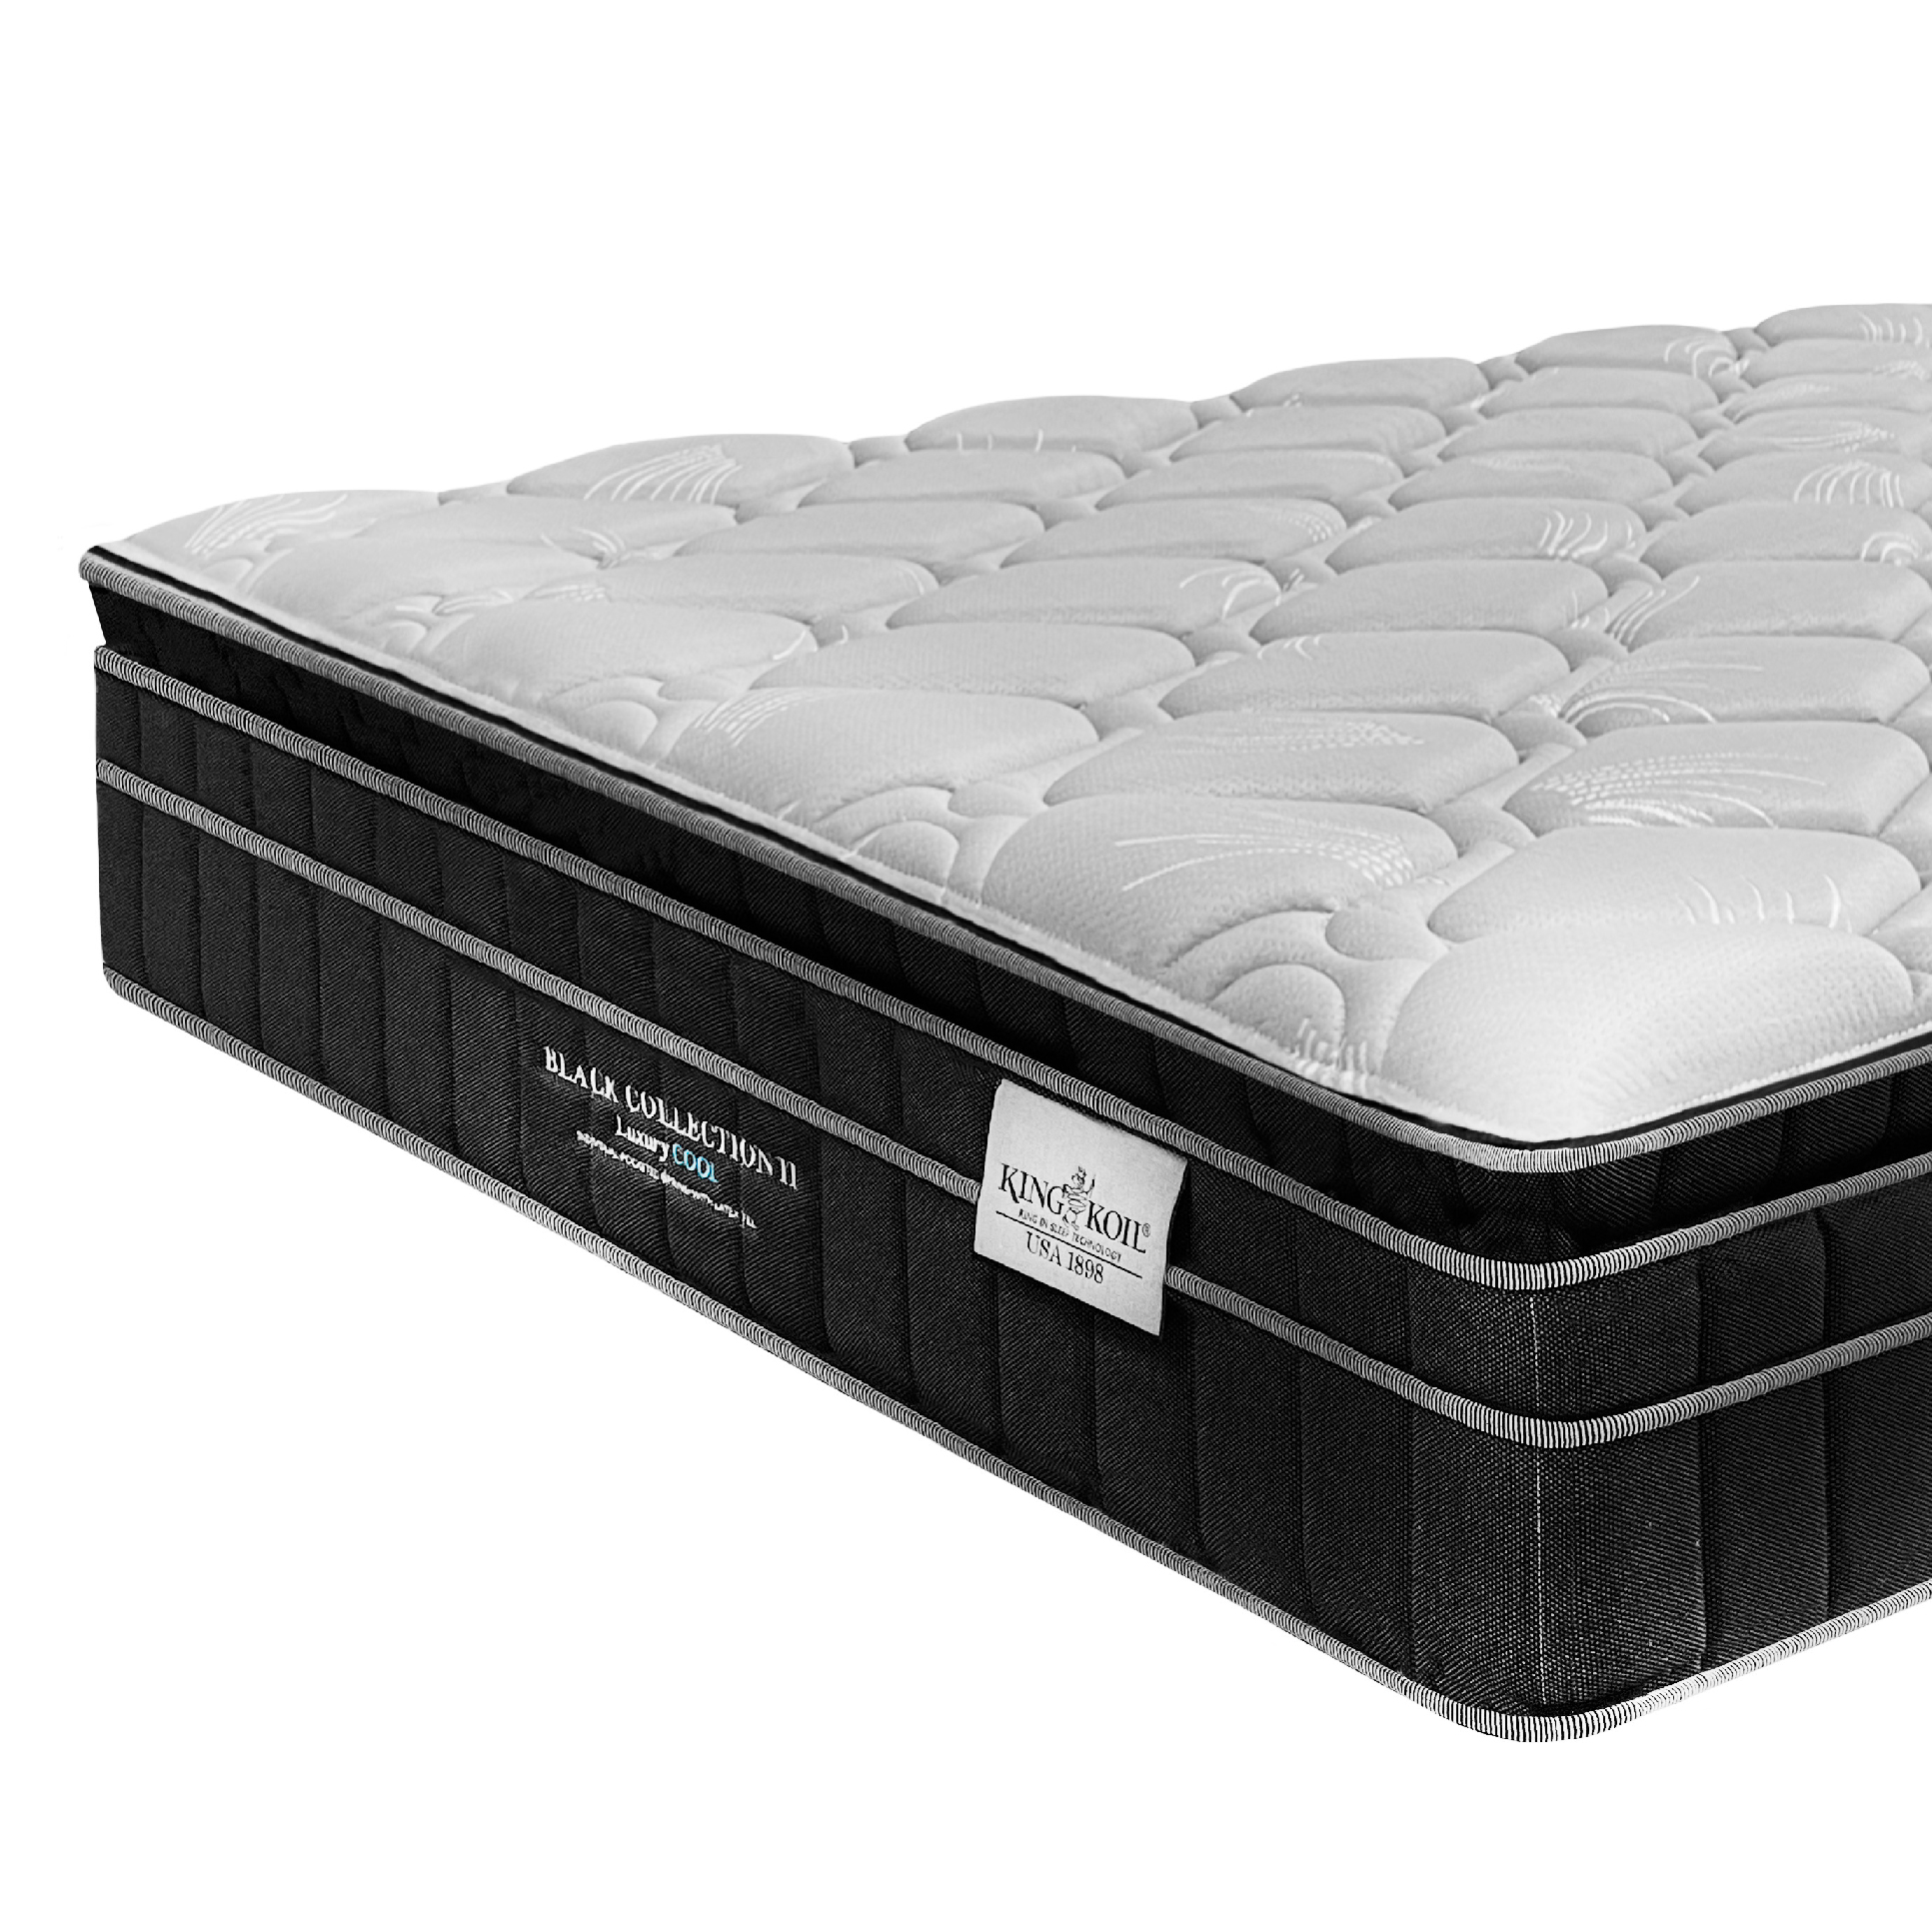 King Koil Black Collection (II) Luxury Cool – Mattress only